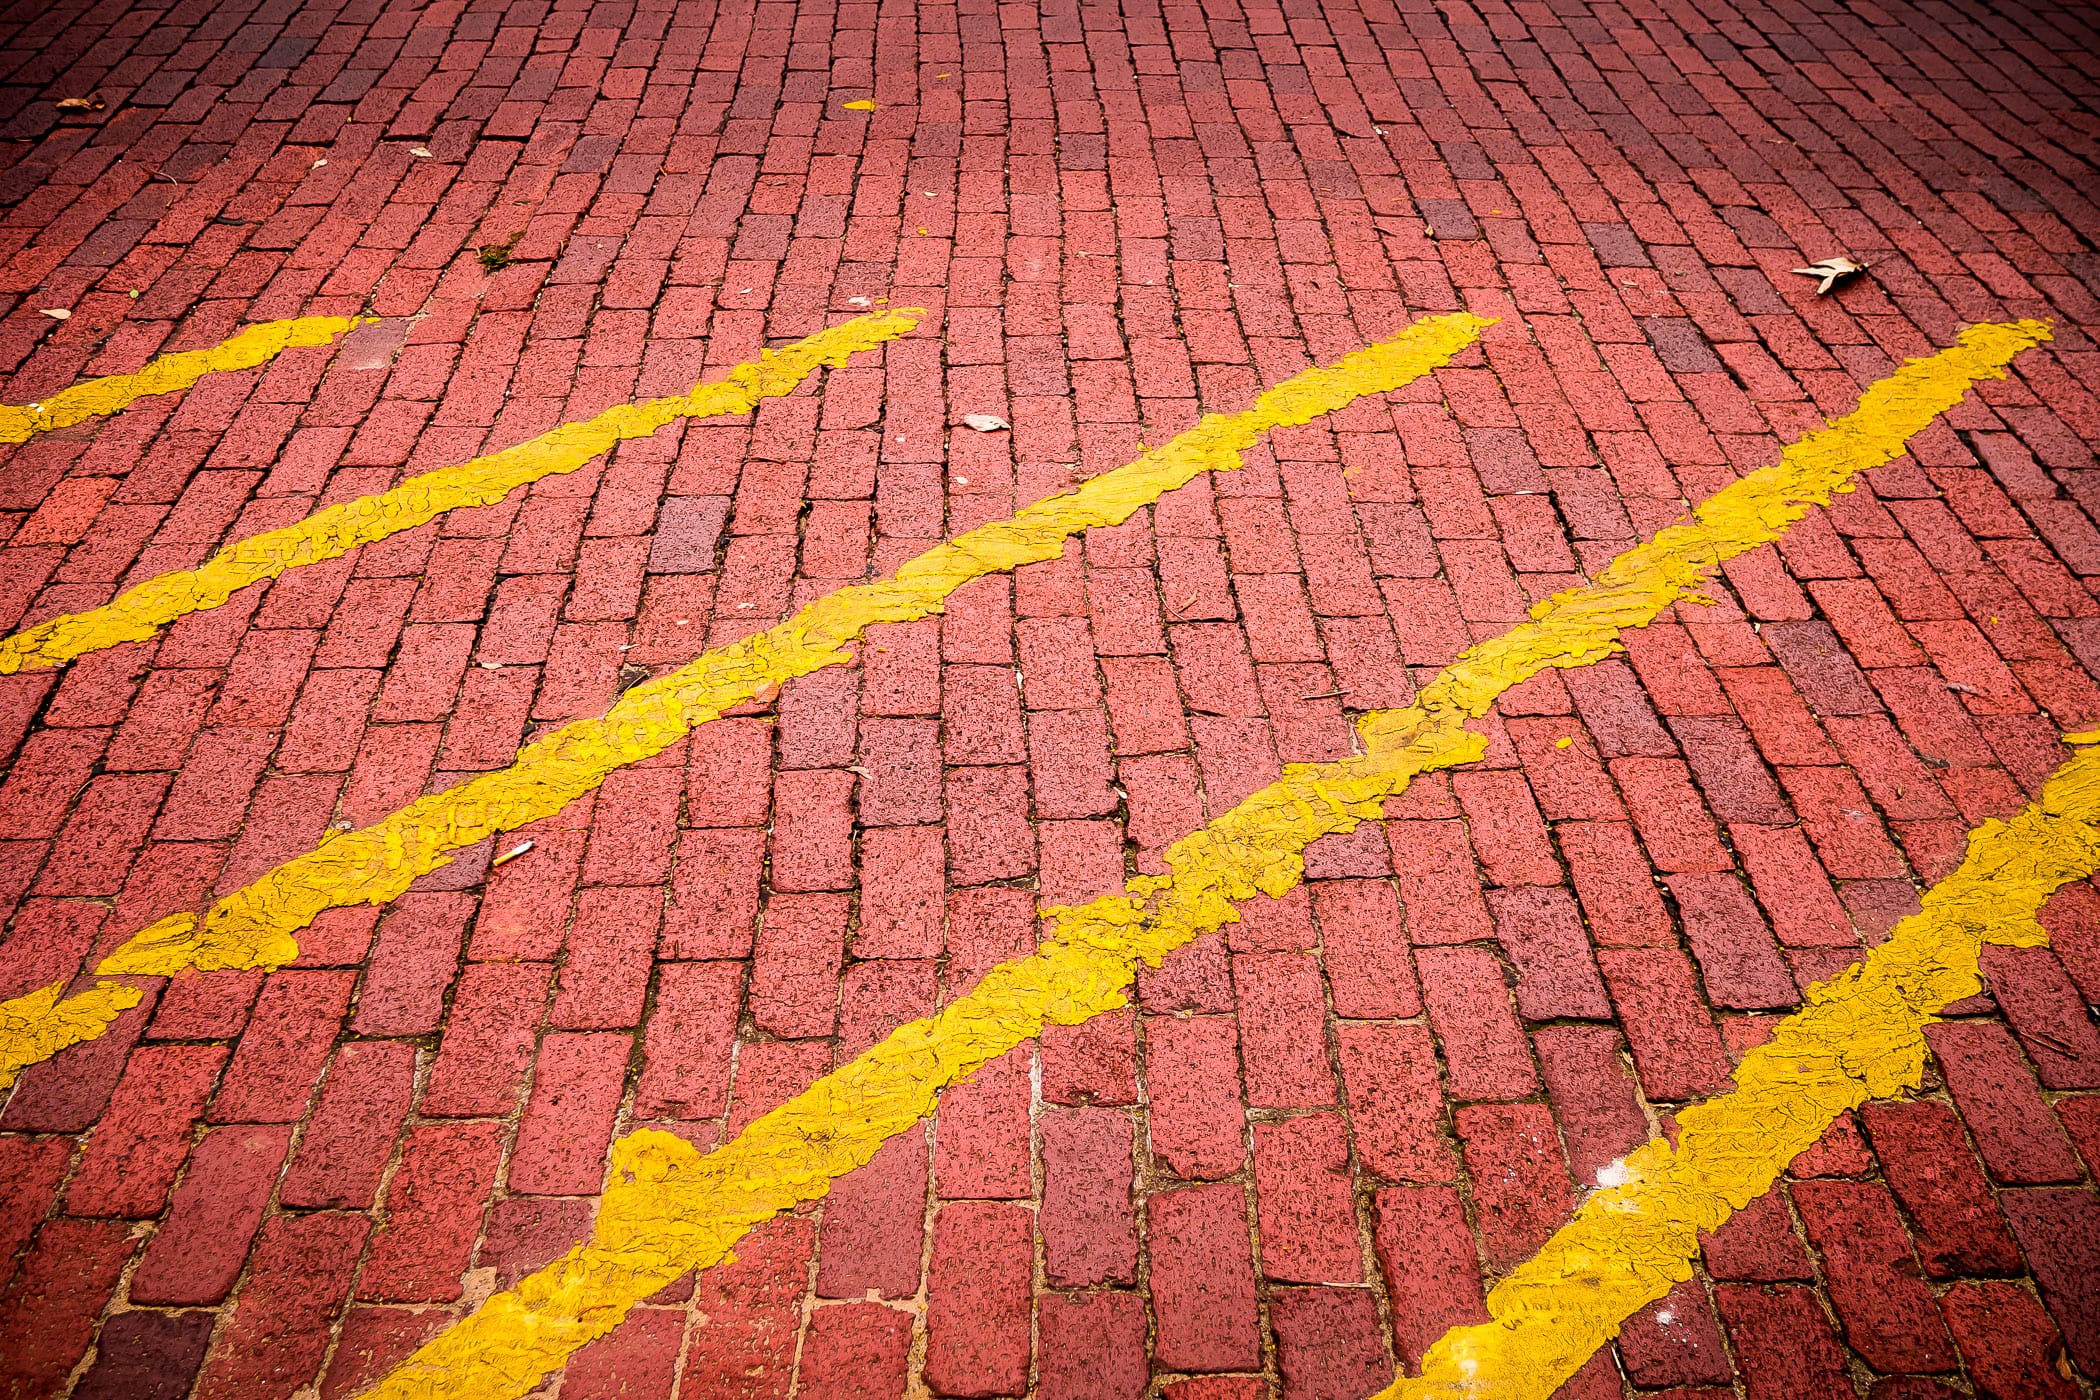 Yellow stripes painted sloppily on a brick street in Downtown Nacogdoches, Texas.